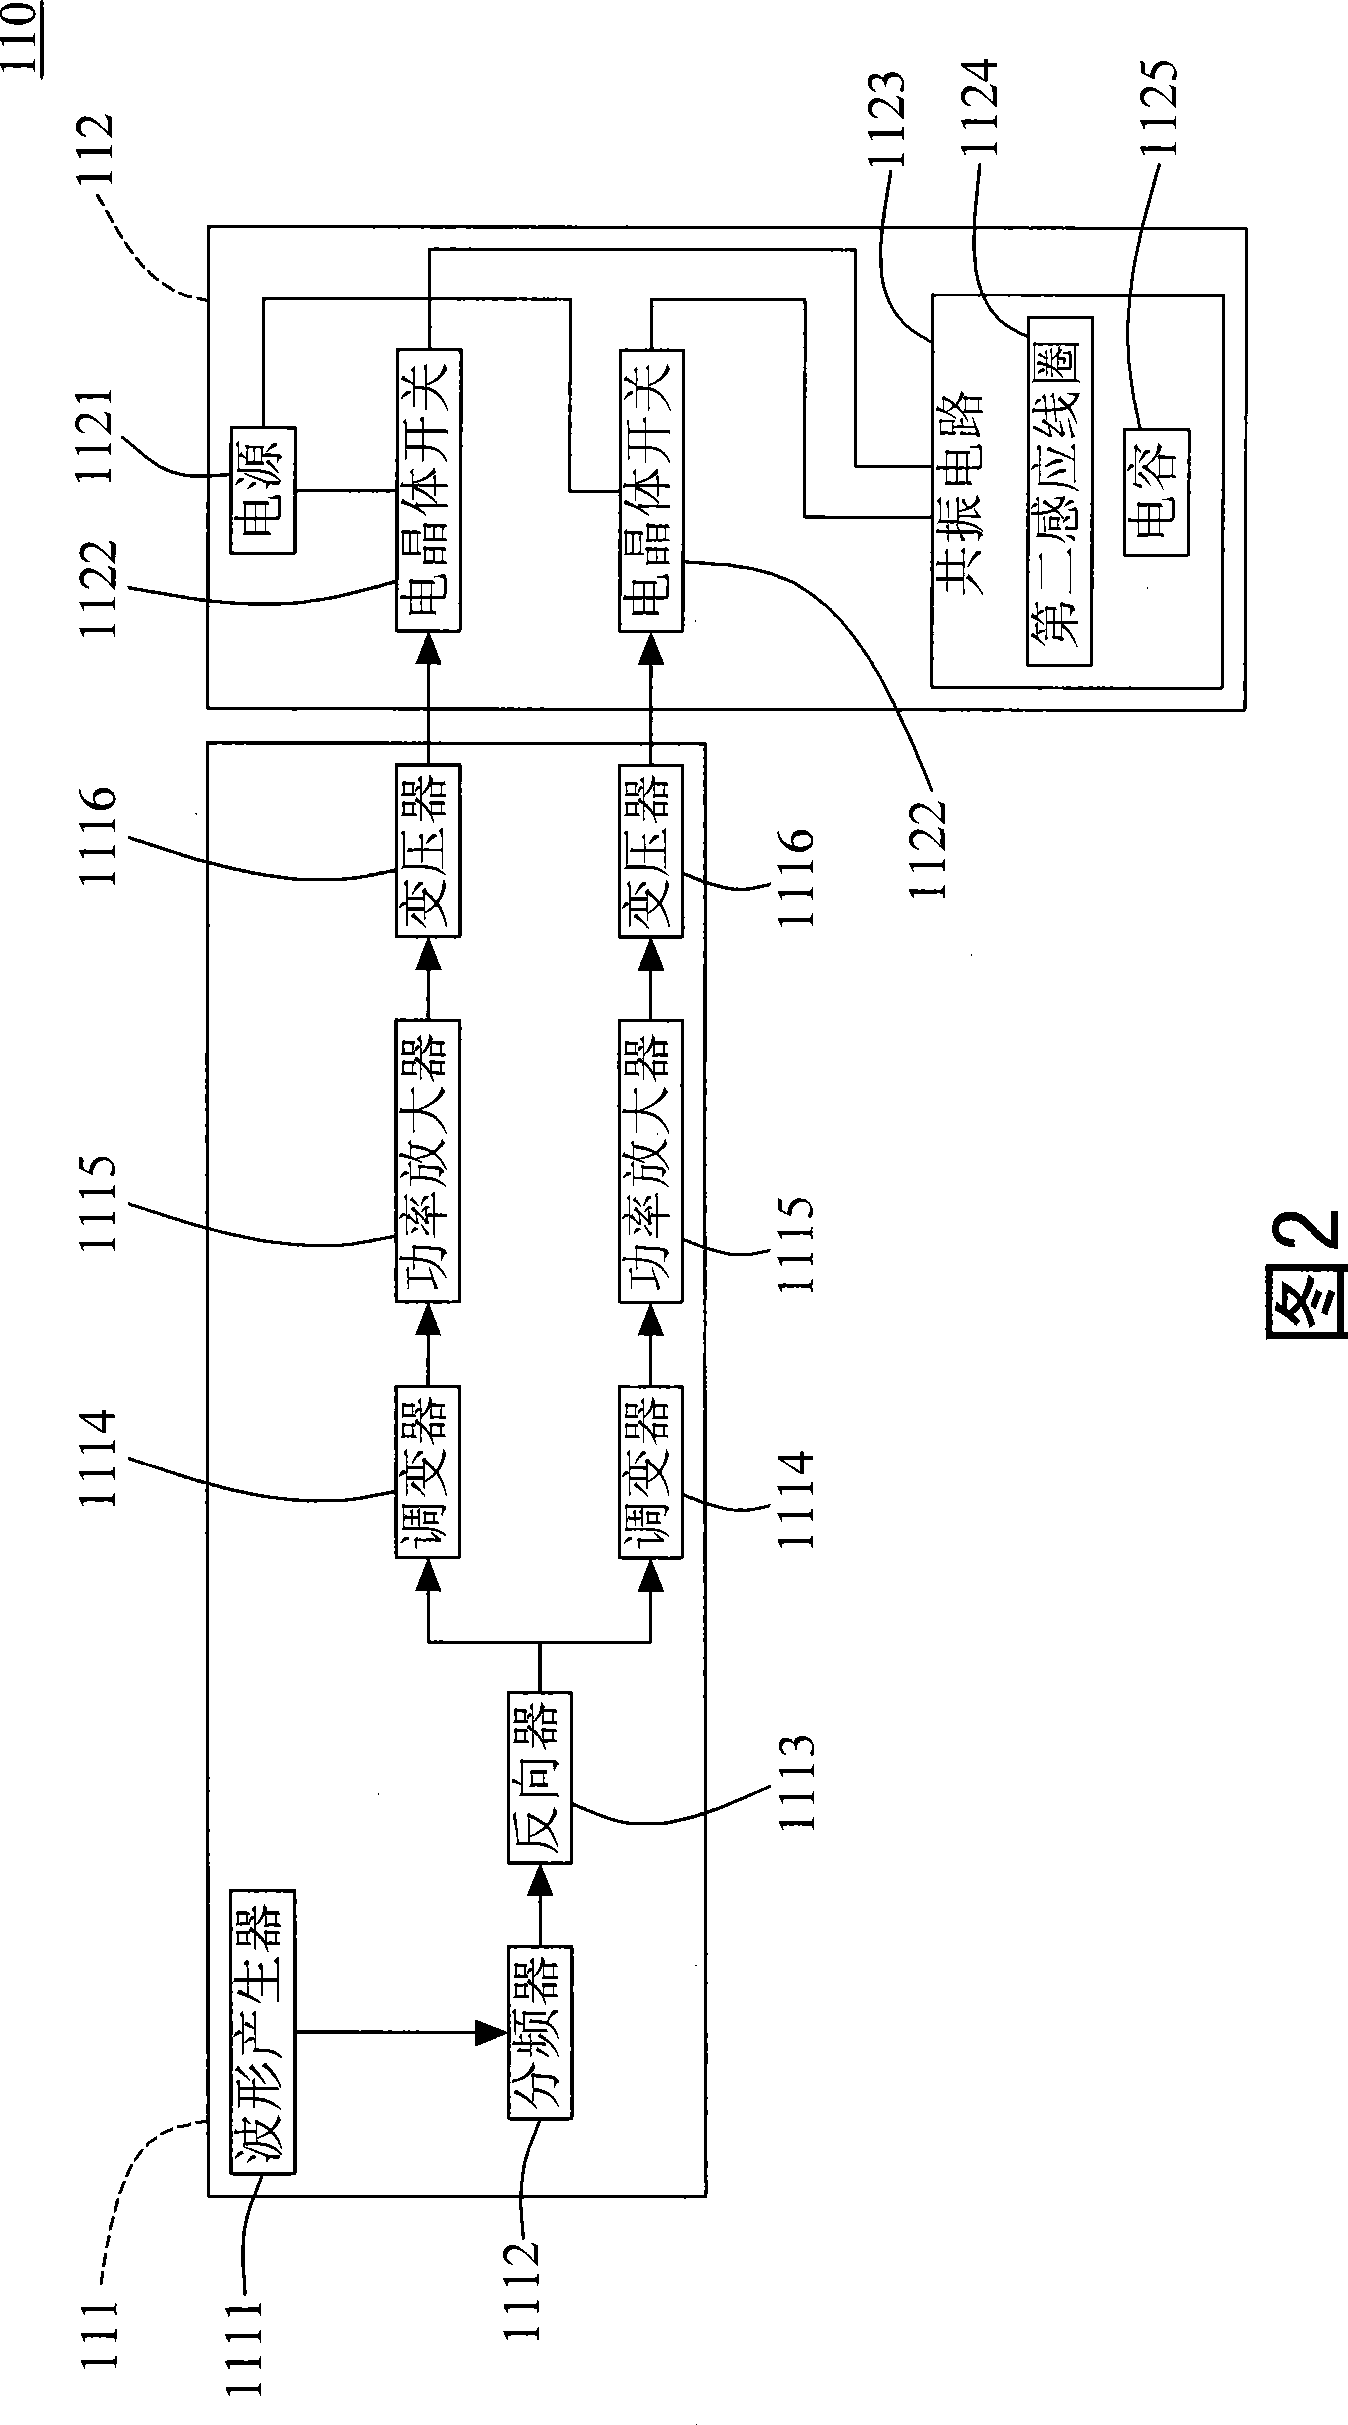 Inductor applied to light power diagnosis and therapy